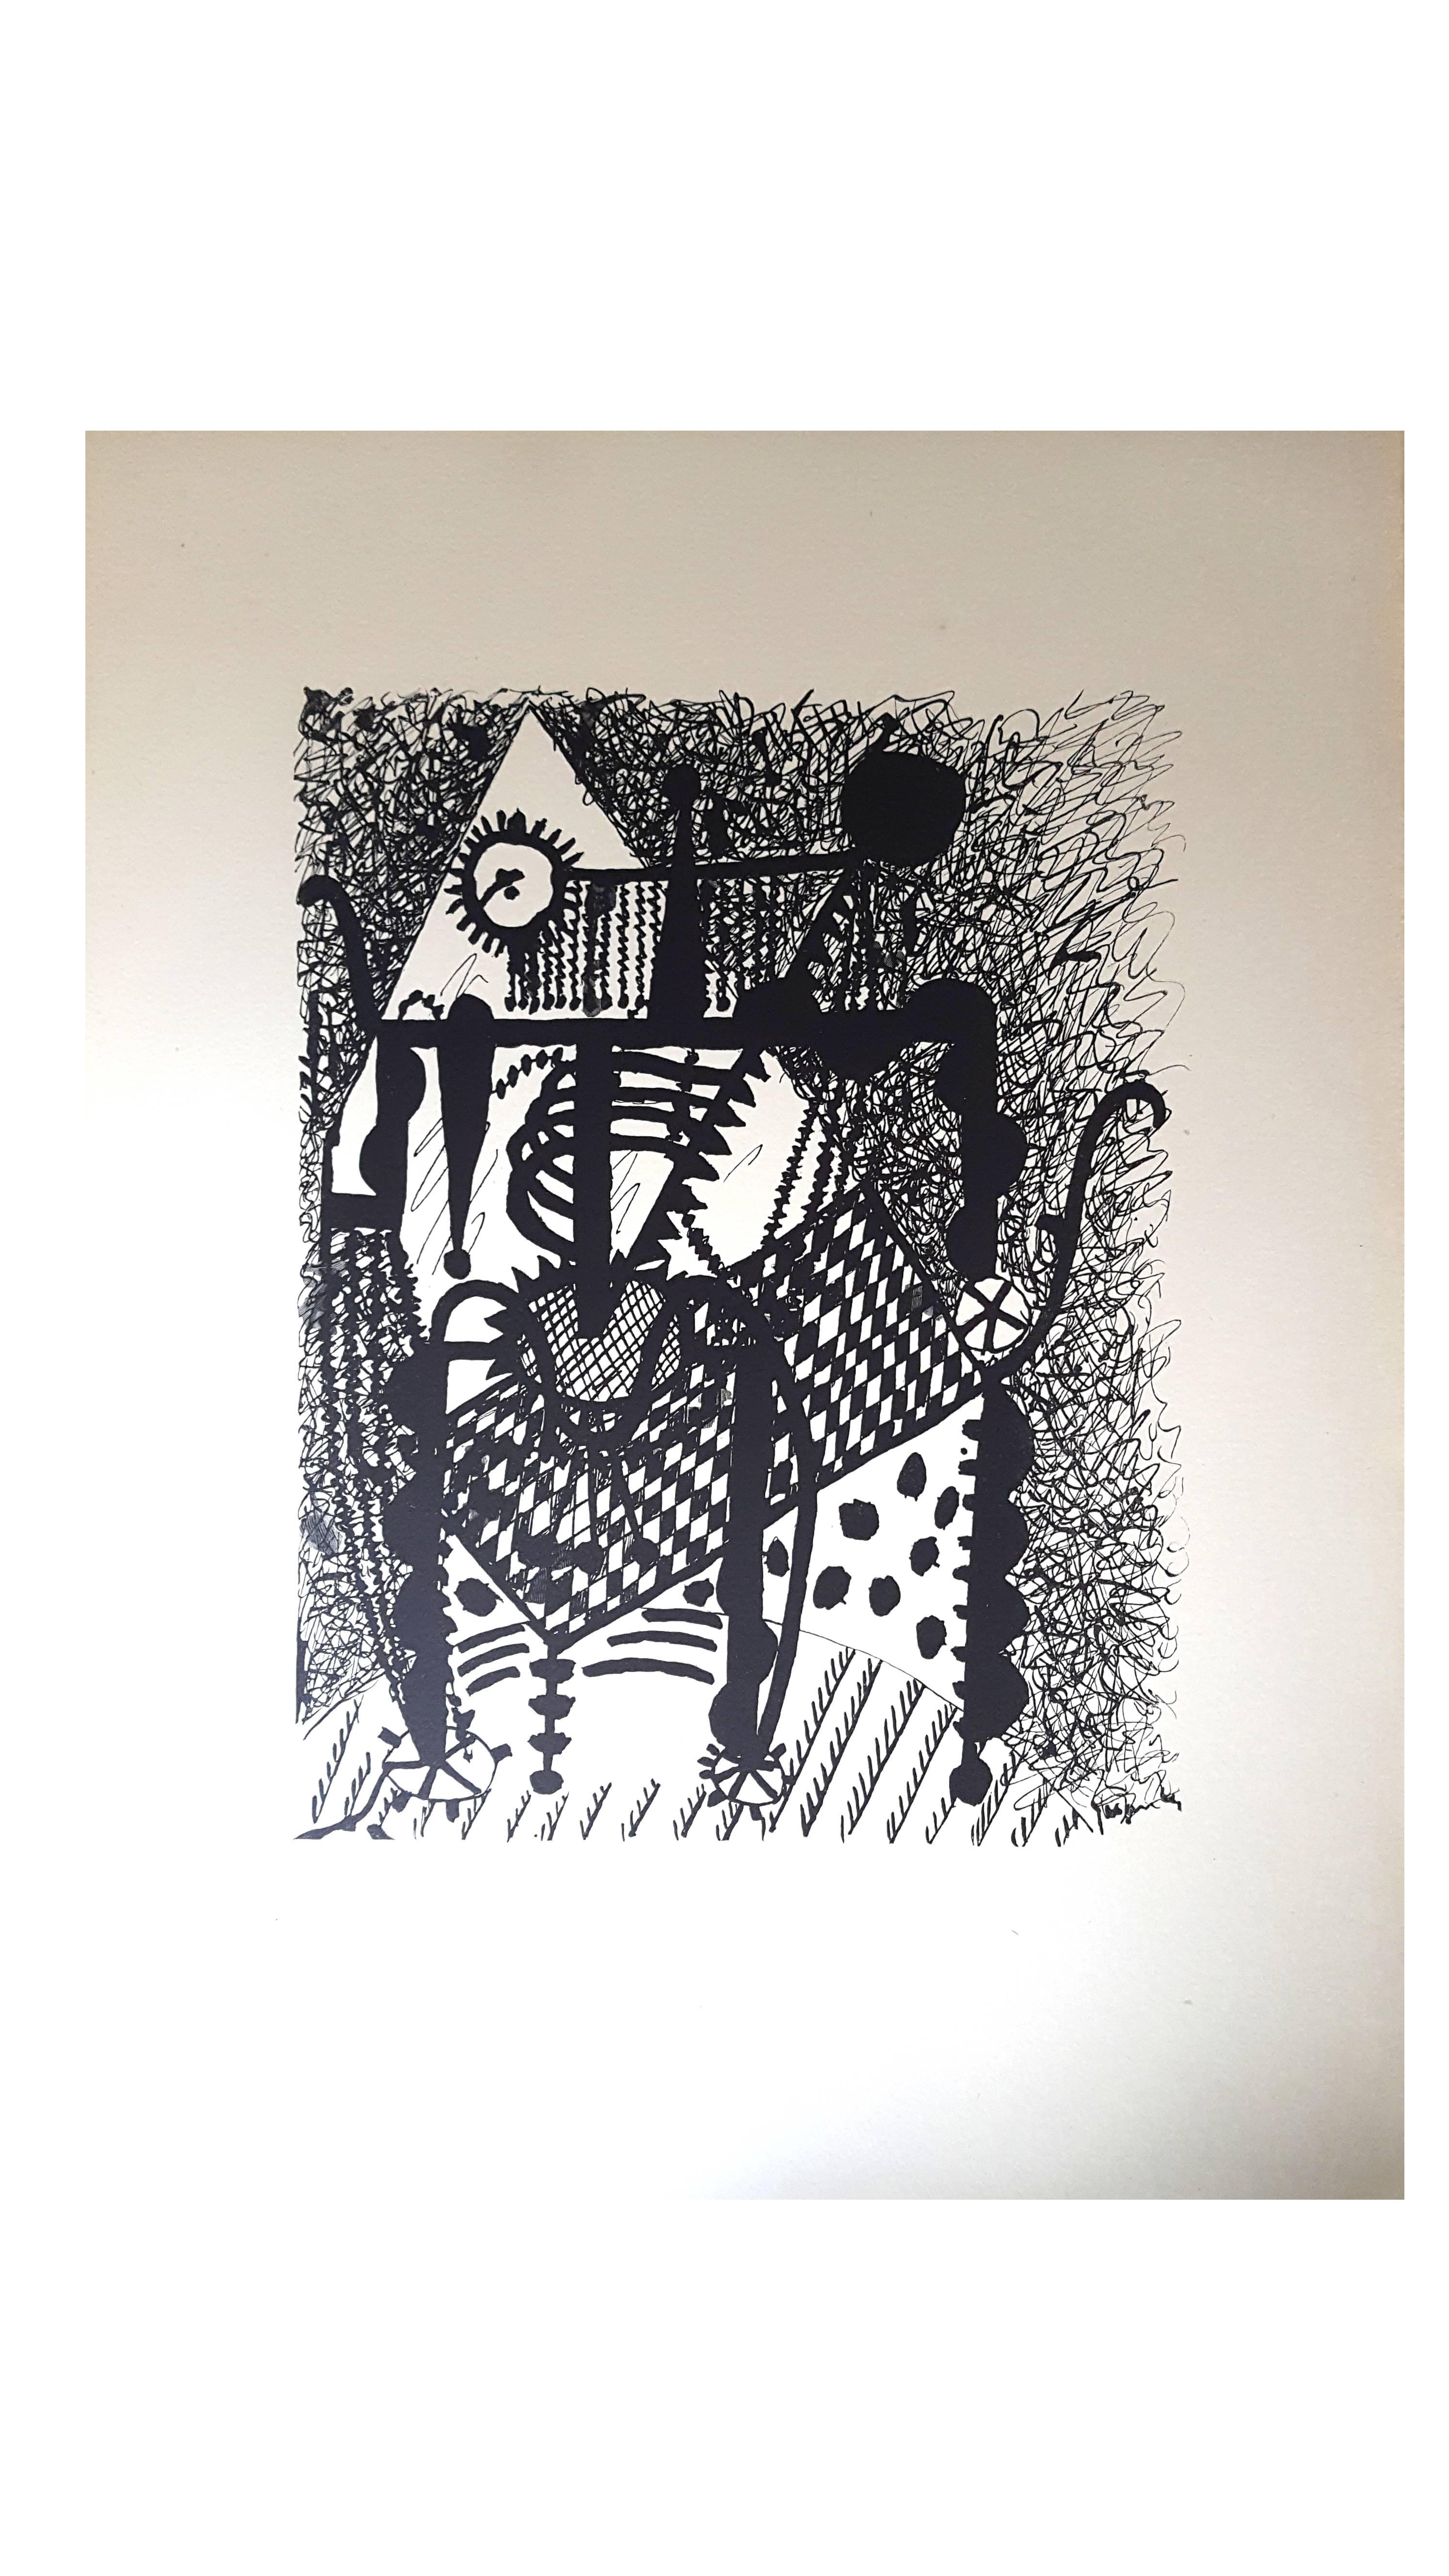 Pablo Picasso (after) Helene Chez Archimede - Wood Engraving - Print by (after) Pablo Picasso